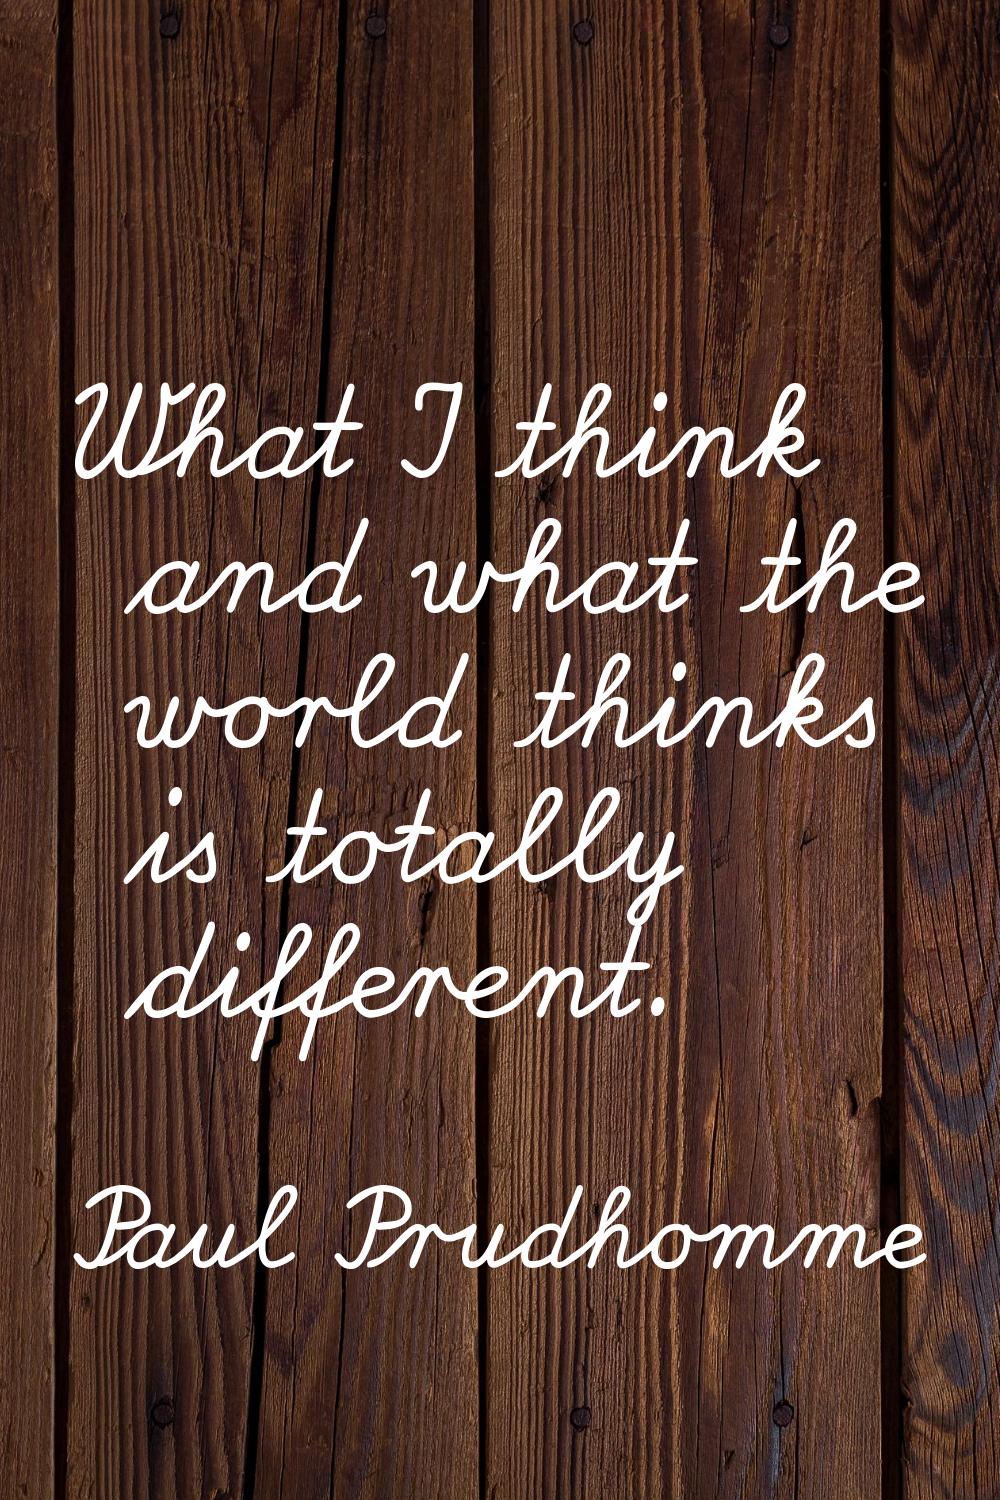 What I think and what the world thinks is totally different.